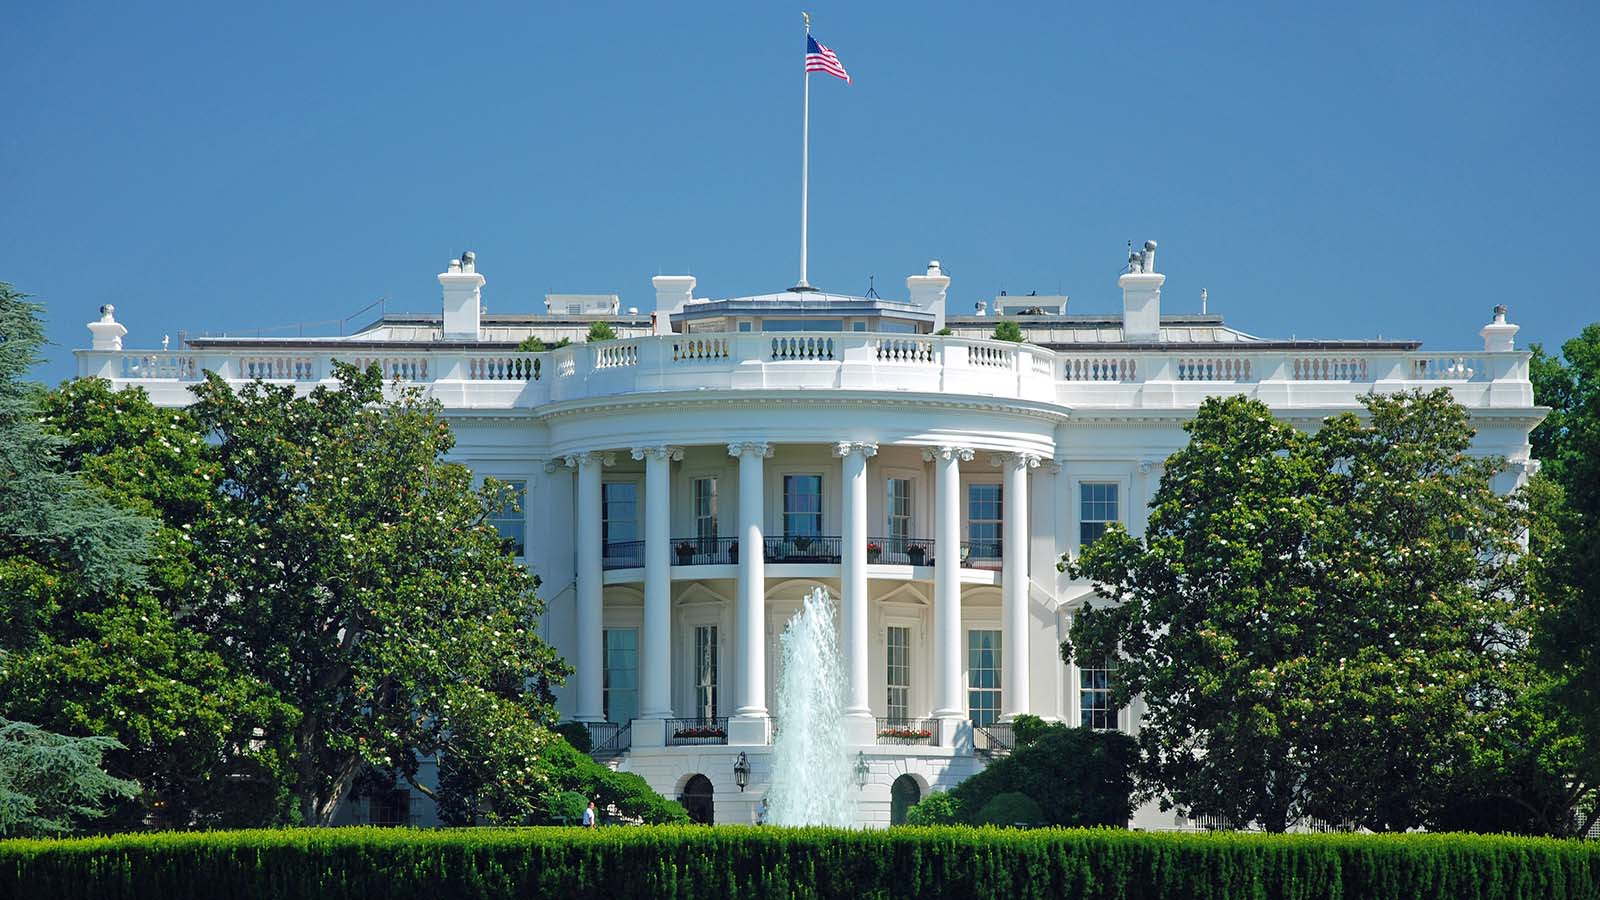 This Is Probably the Hardest Random Knowledge Quiz I’ve Ever Taken, But If You Think You Can Pass It, Be My Guest White House, Washington, D.C., United States